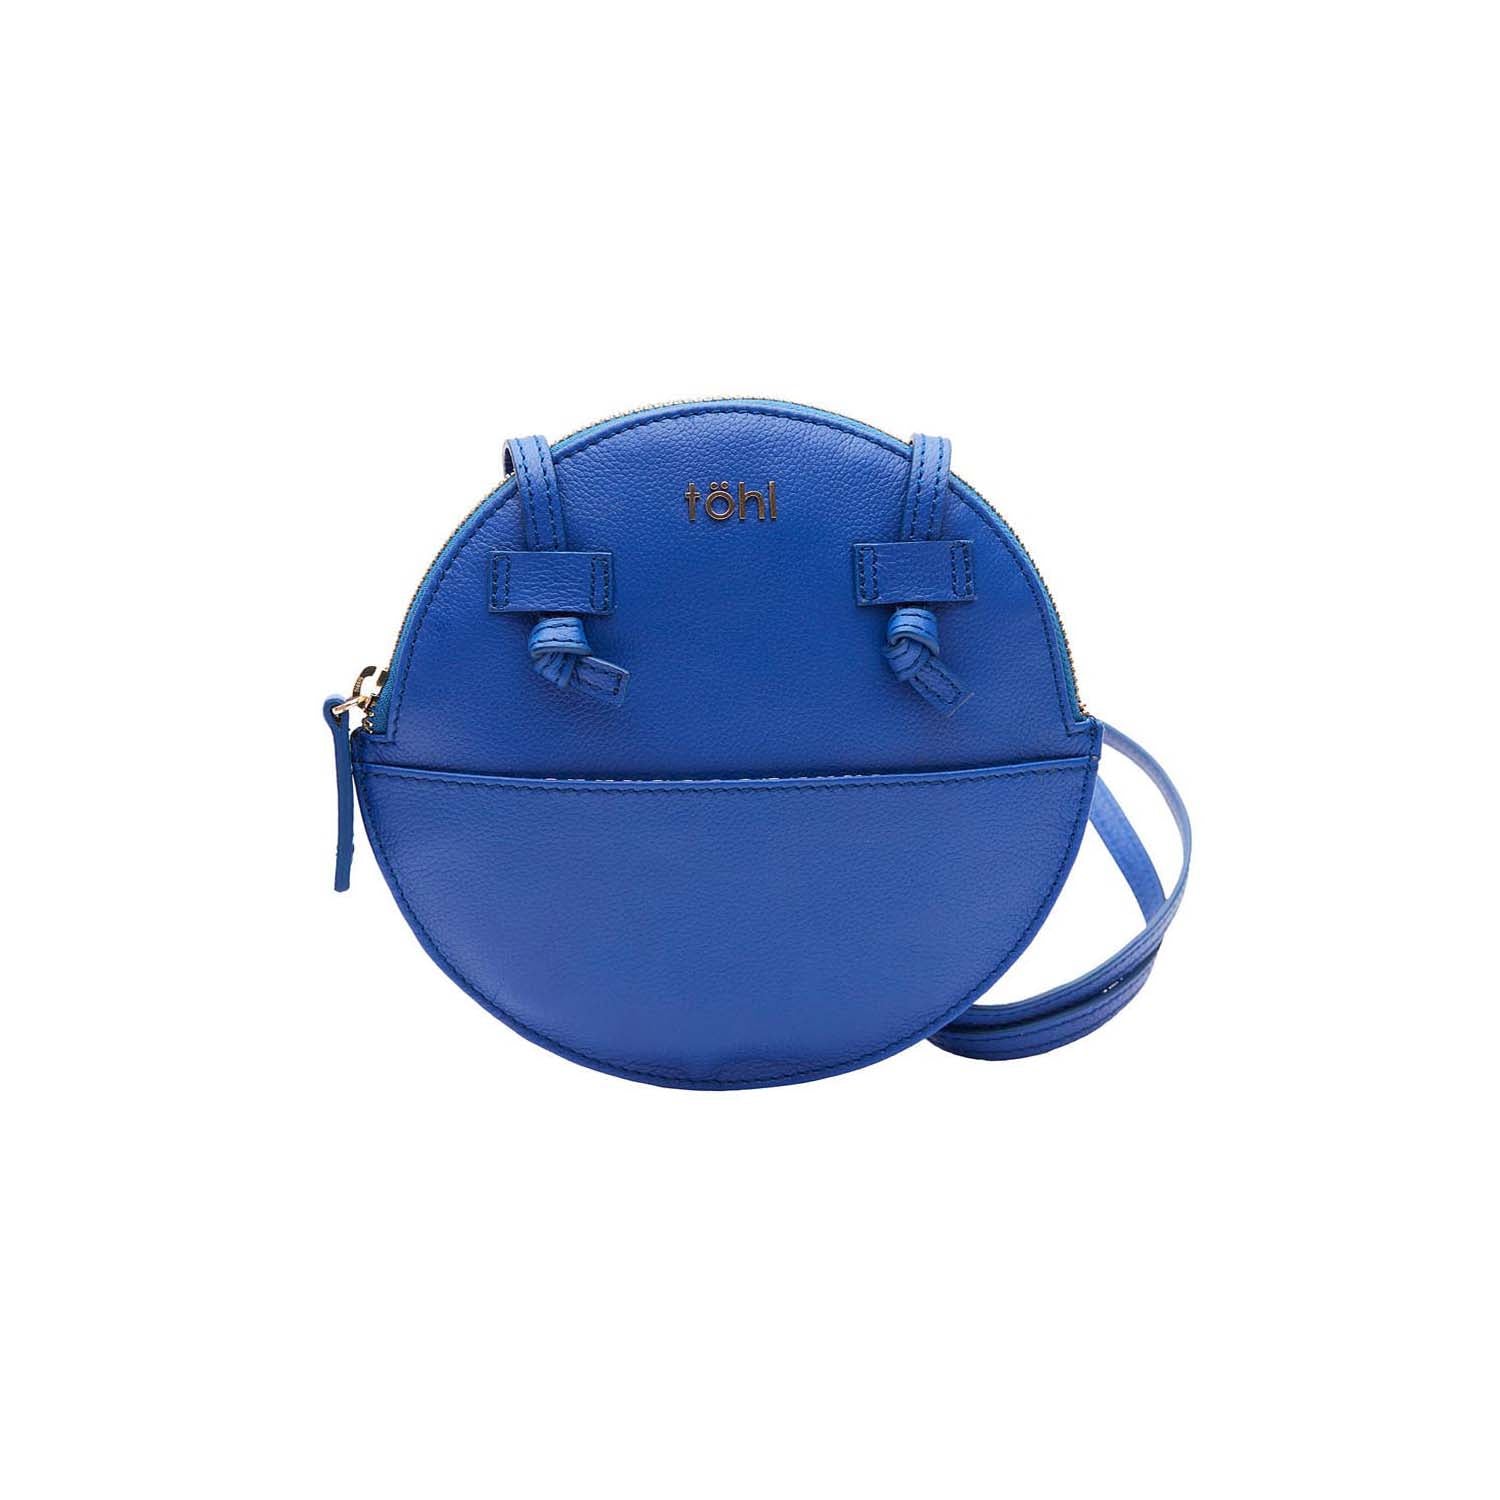 Blue Leather Tote Bag